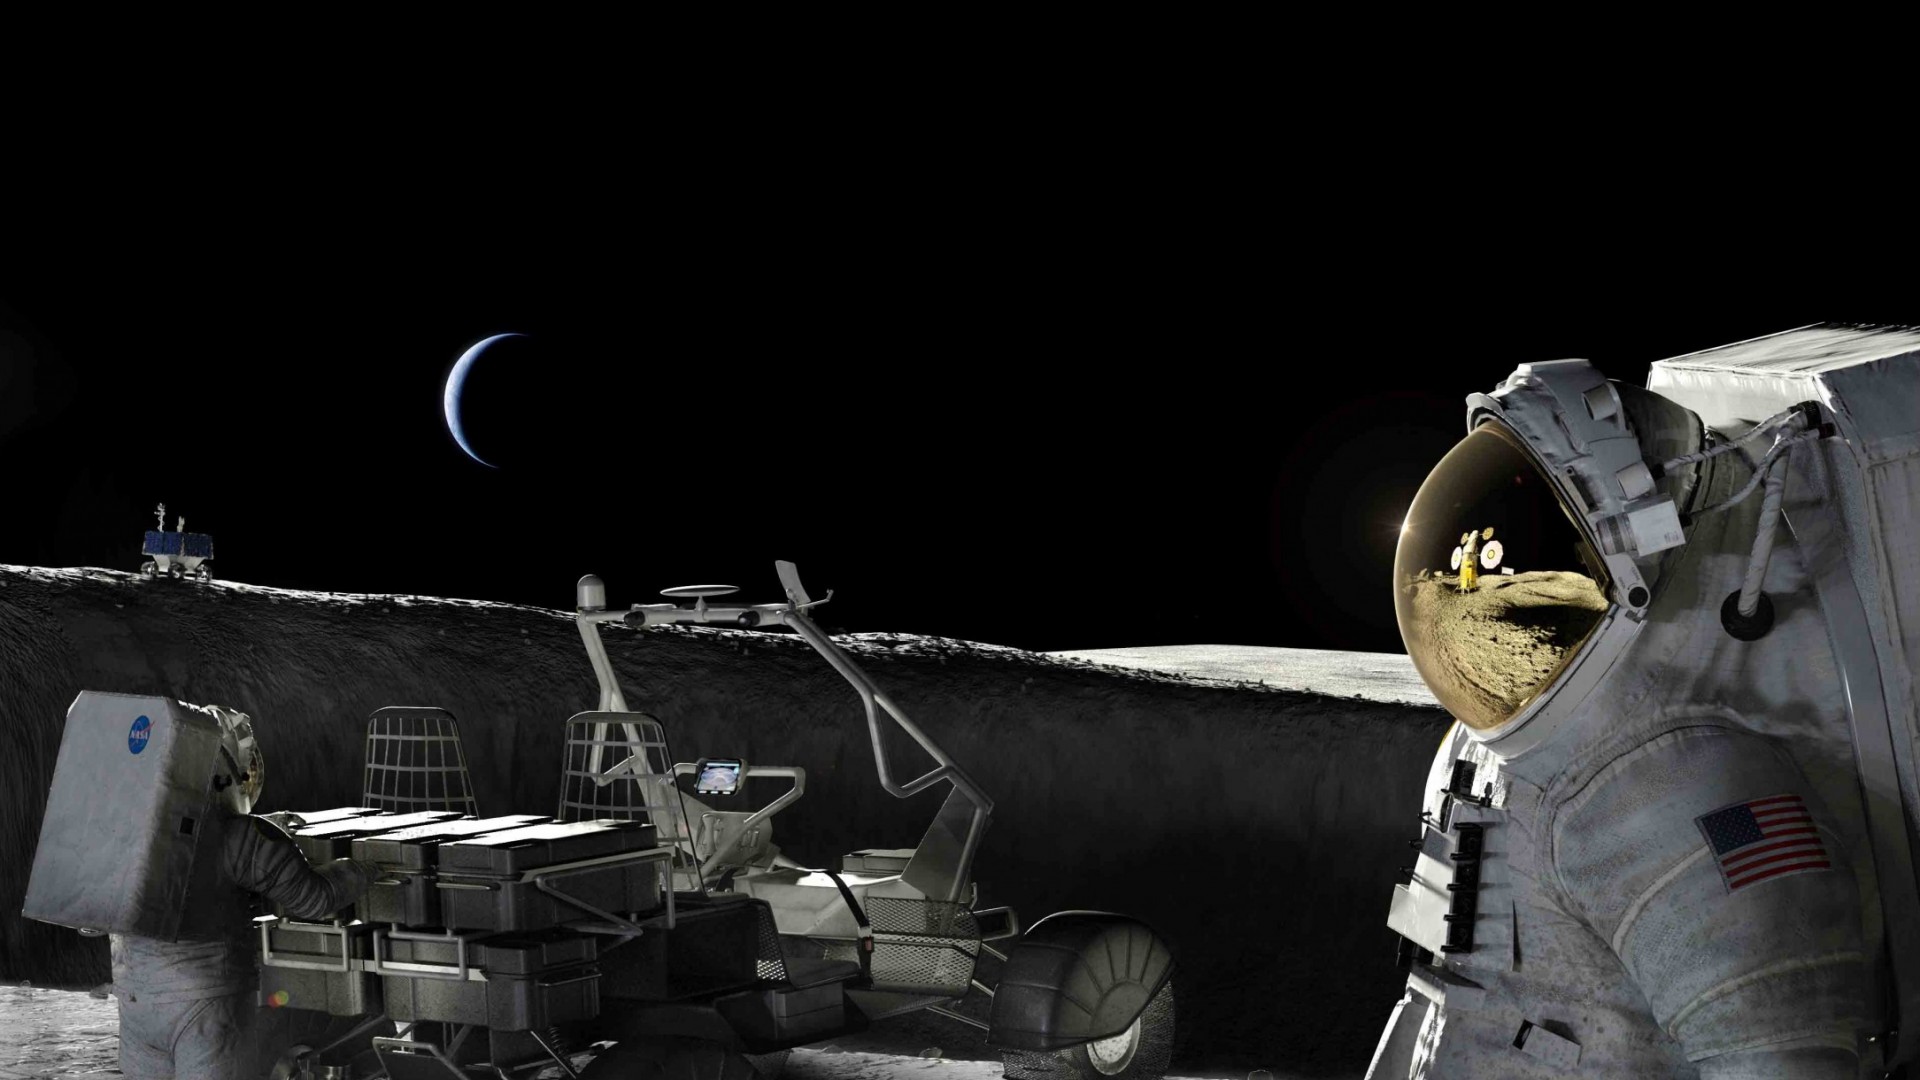 NASA: Forward to the Moon with Commercial Partners